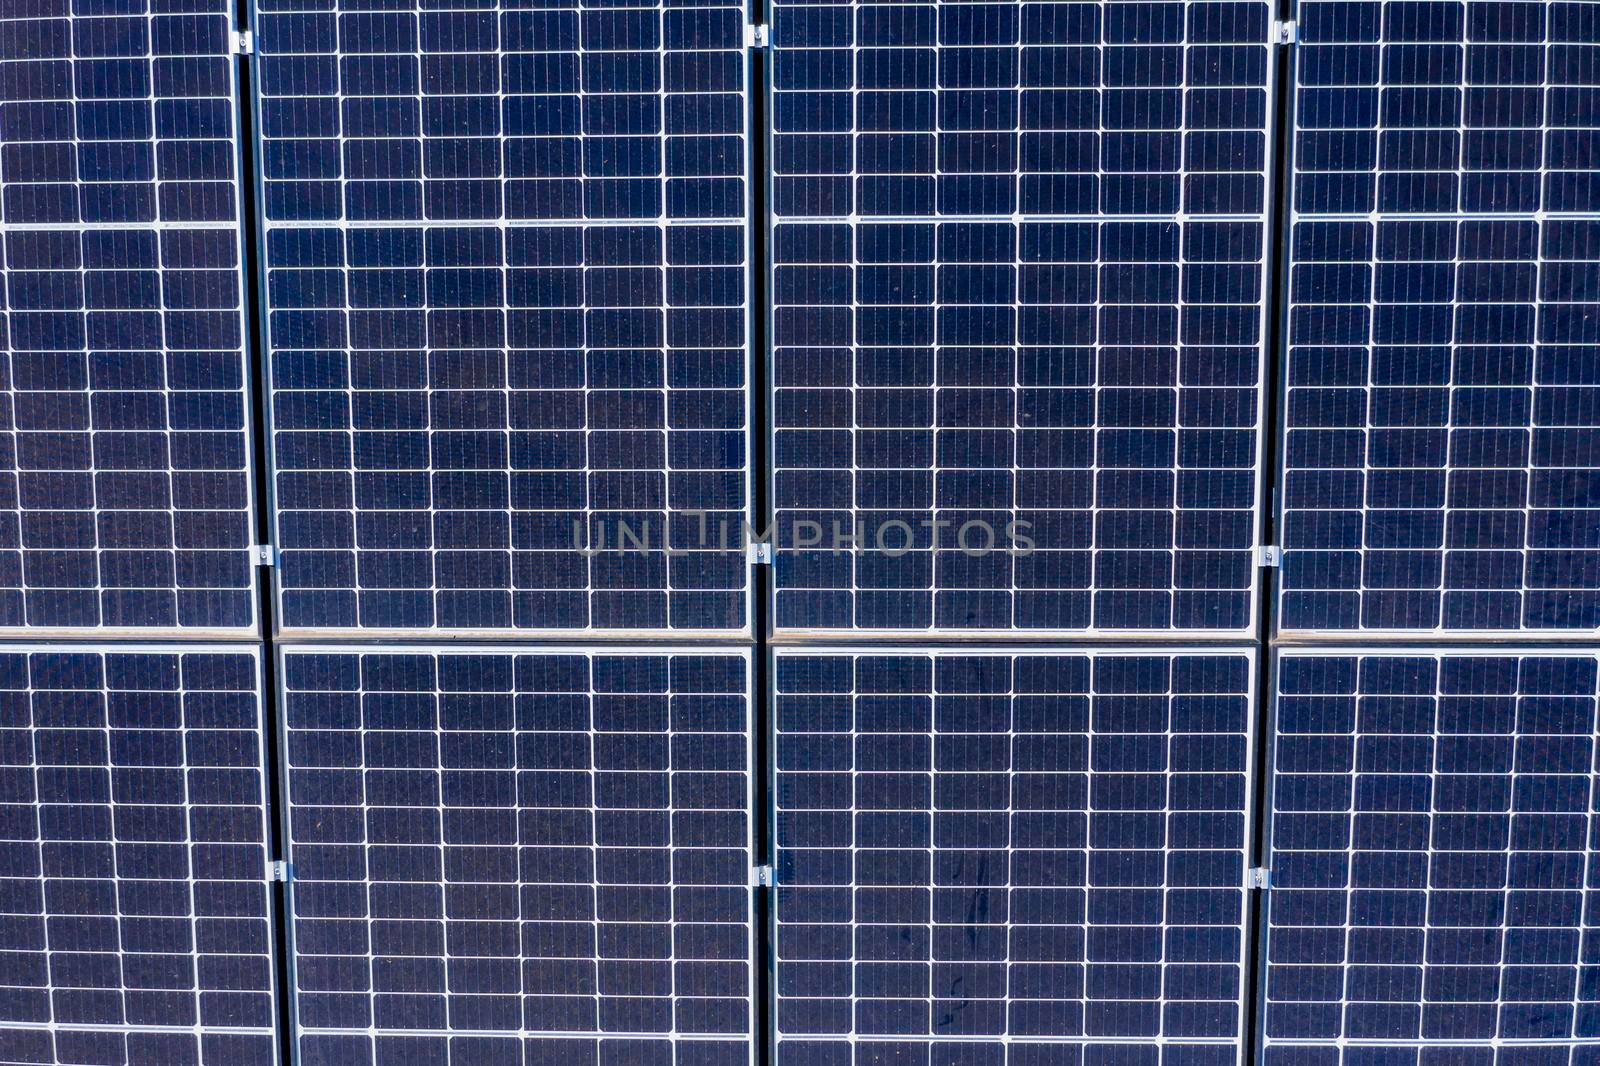 Aerial view of blue solar panels in a square grid pattern on a residential roof